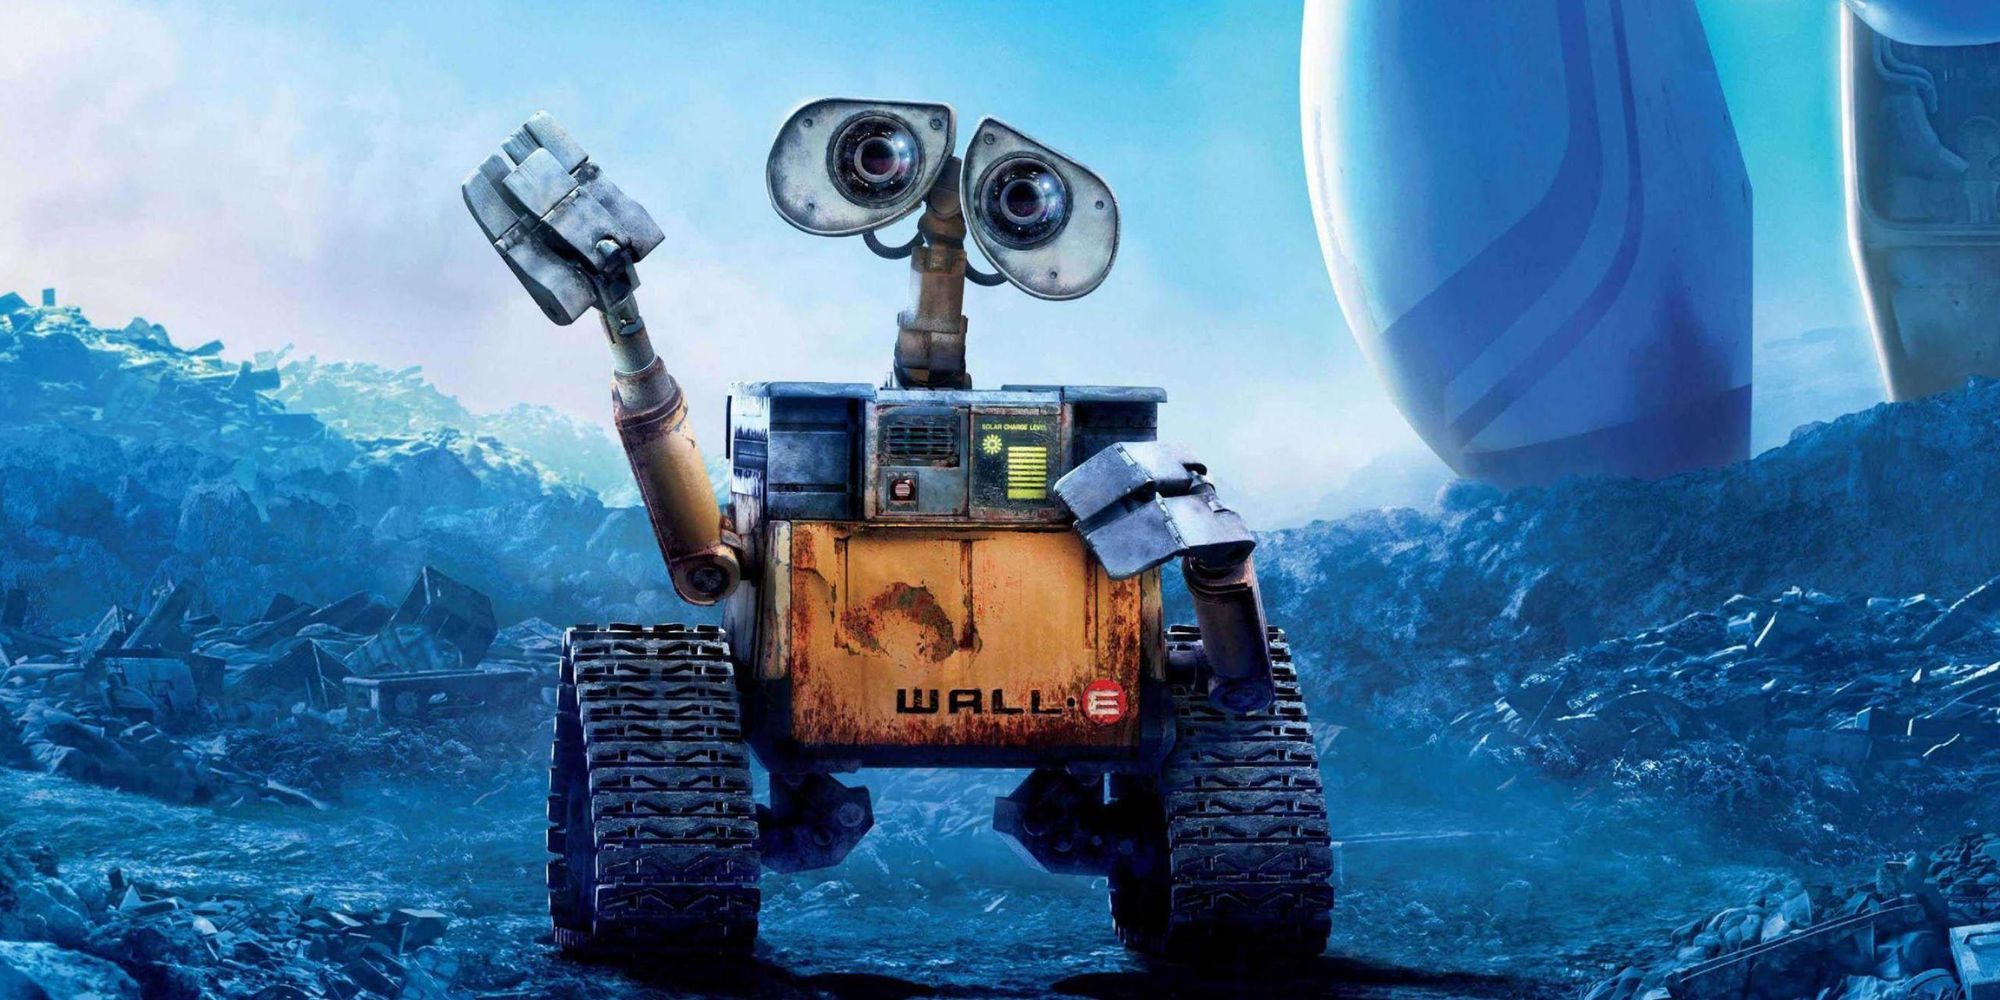 Wall-E waving at the viewer in a poster for 'WALL-E'